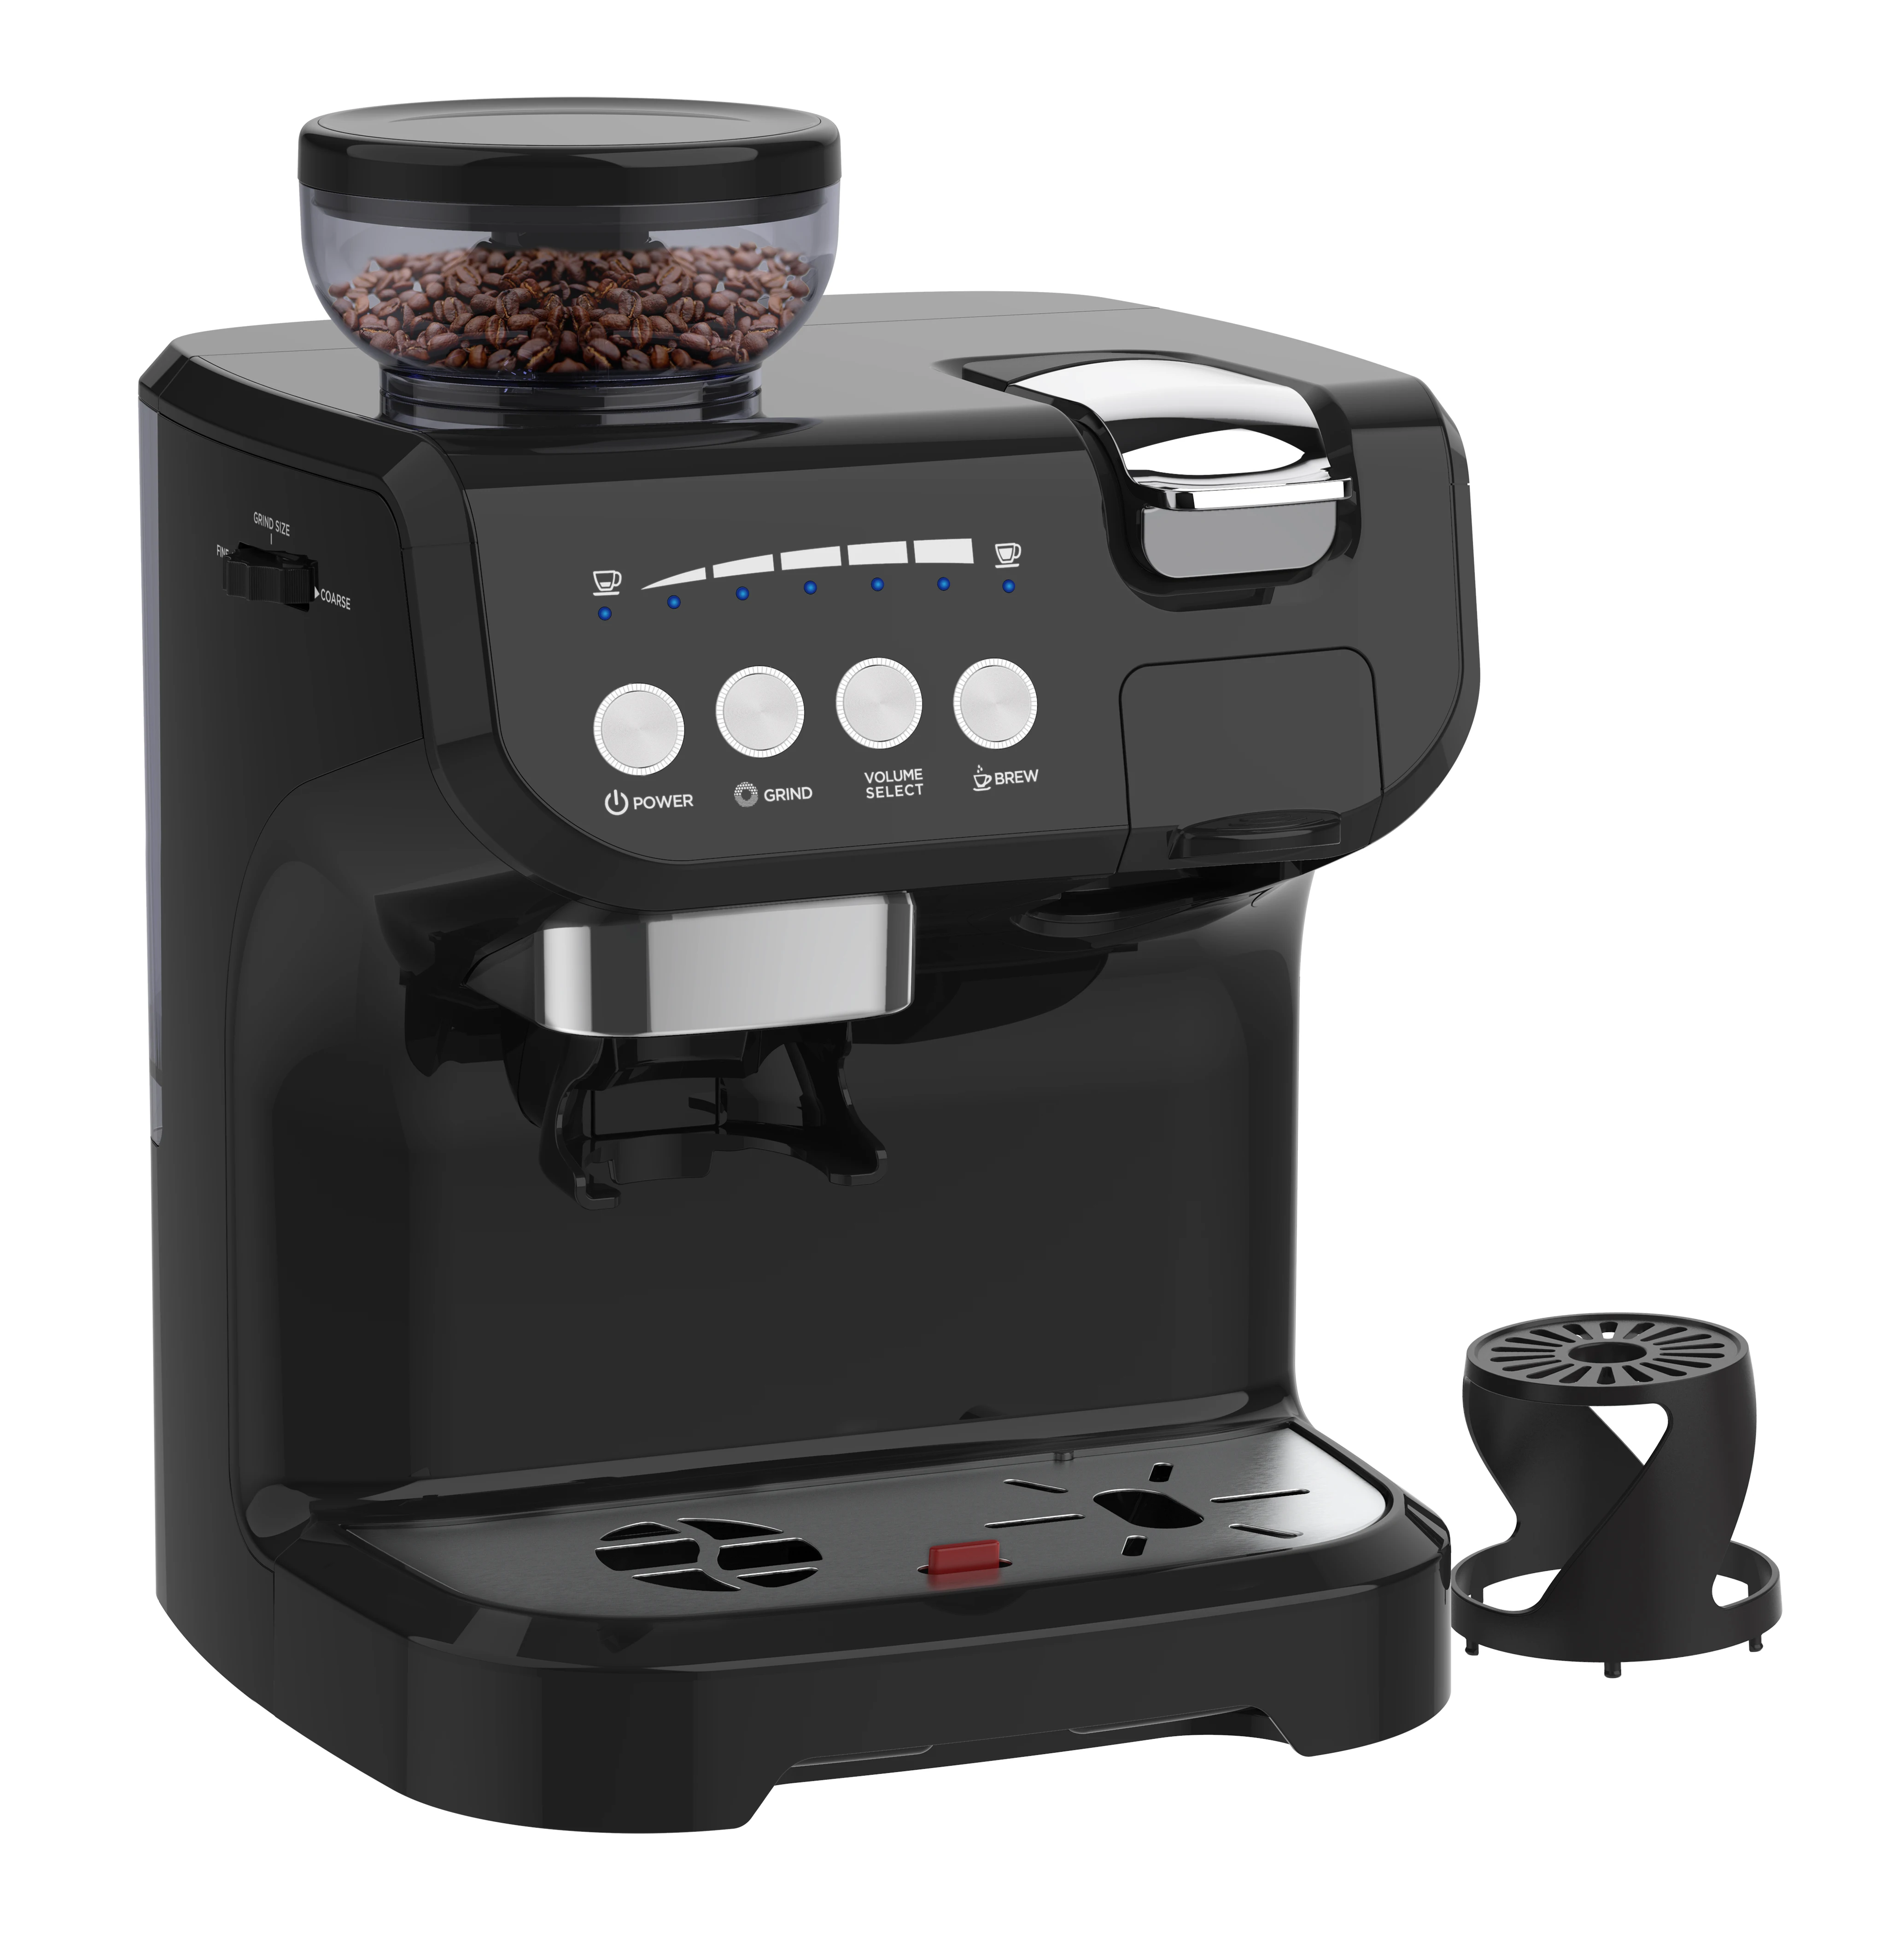 Behoren verdrietig verhoging Stelang Commercial Cafe Koffiemachine Nespresso Coffee Machine Krups Dolce  6 In 1 Capsules Maker - Buy Nespresso Coffee Machine,Capsules Maker  Coffee,Coffee Machine Krups Dolce Product on Alibaba.com